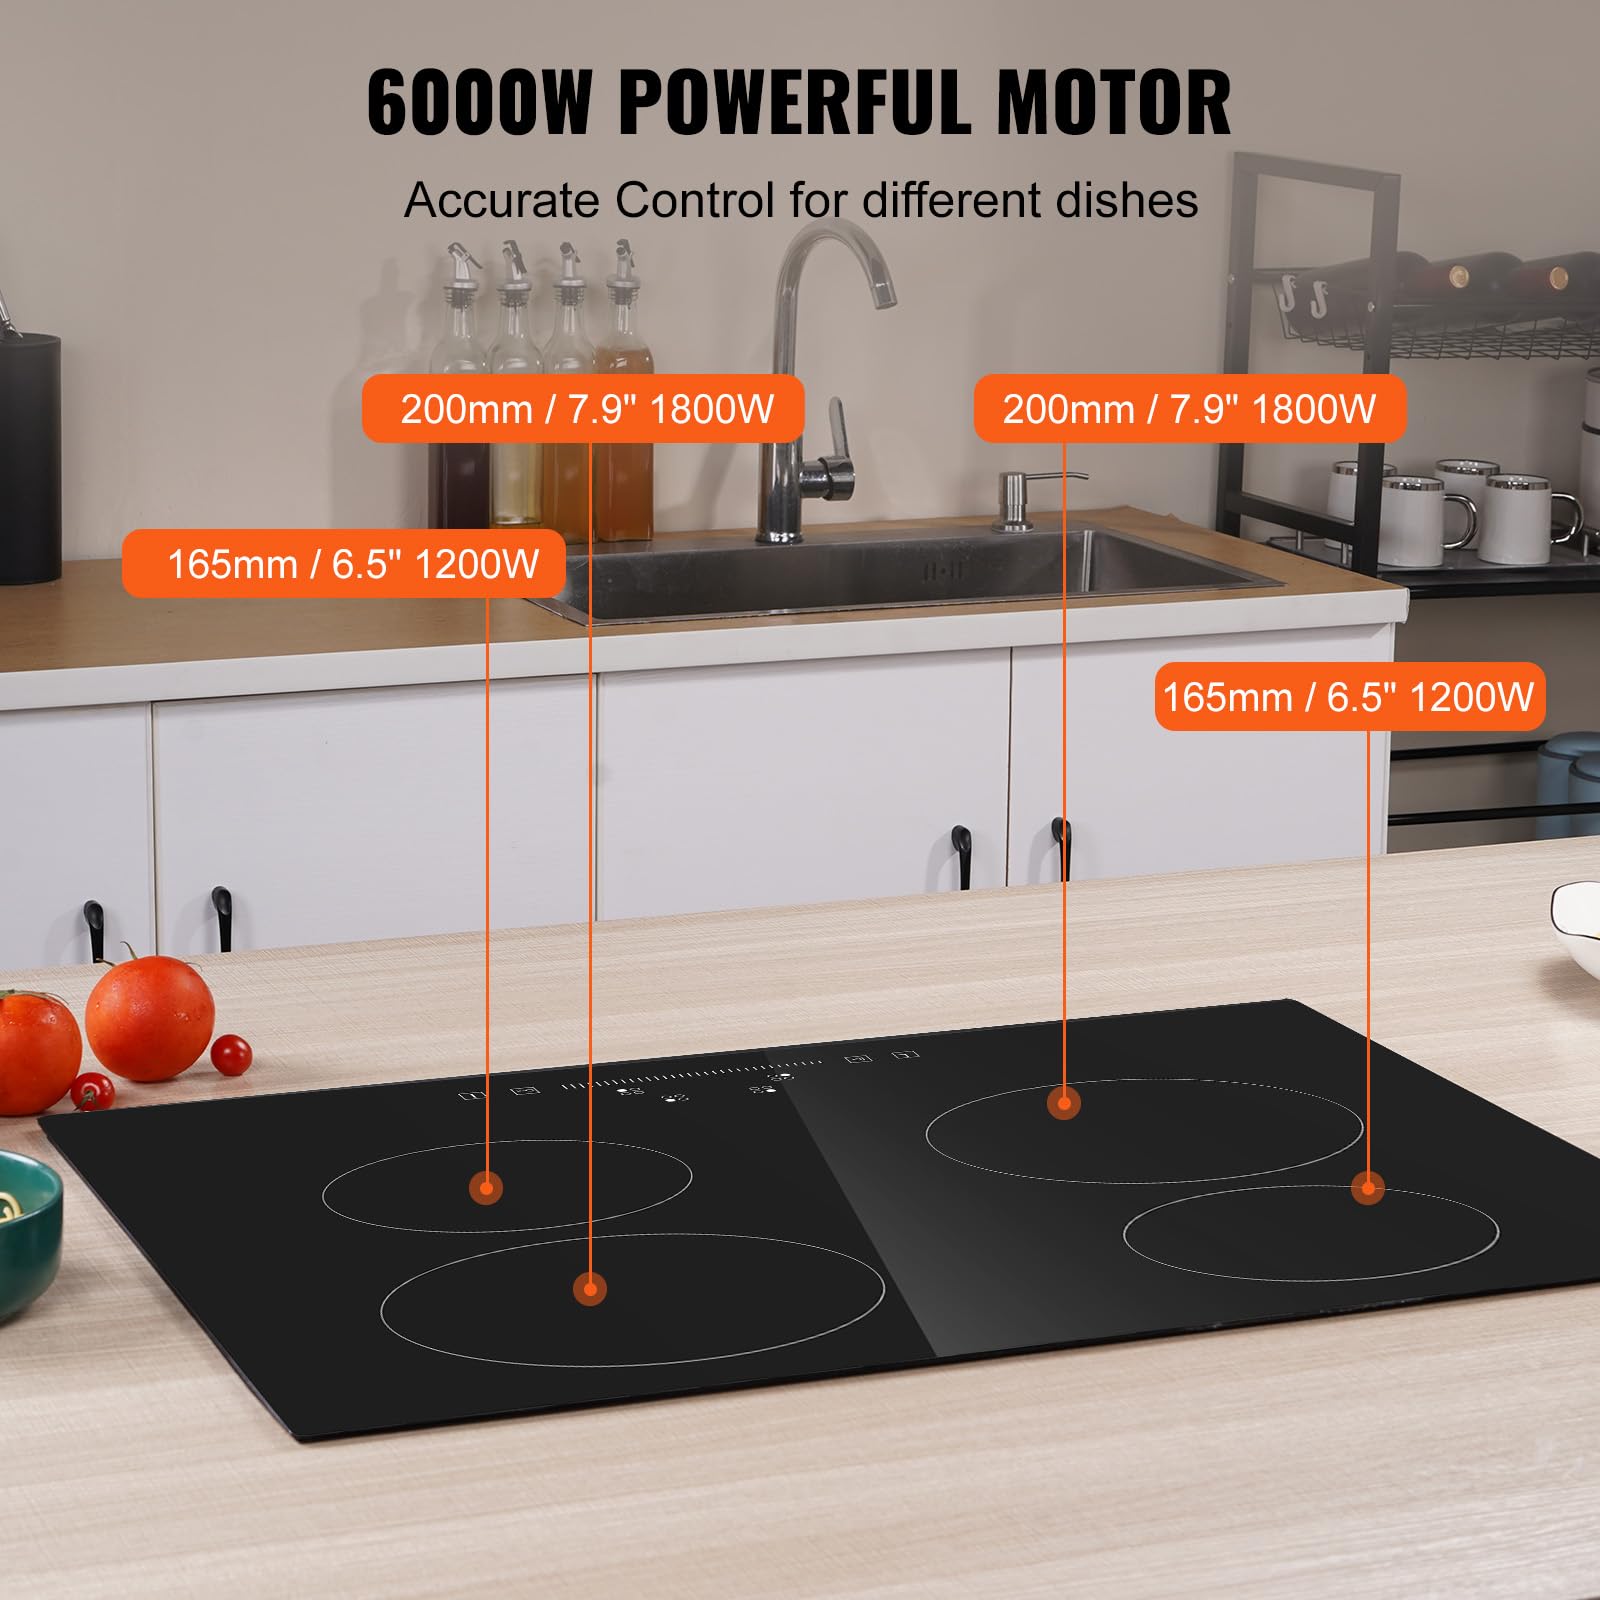 VEVOR LT4-77 Built in Electric Stove Top Glass Radiant Cooktop with Touch Control